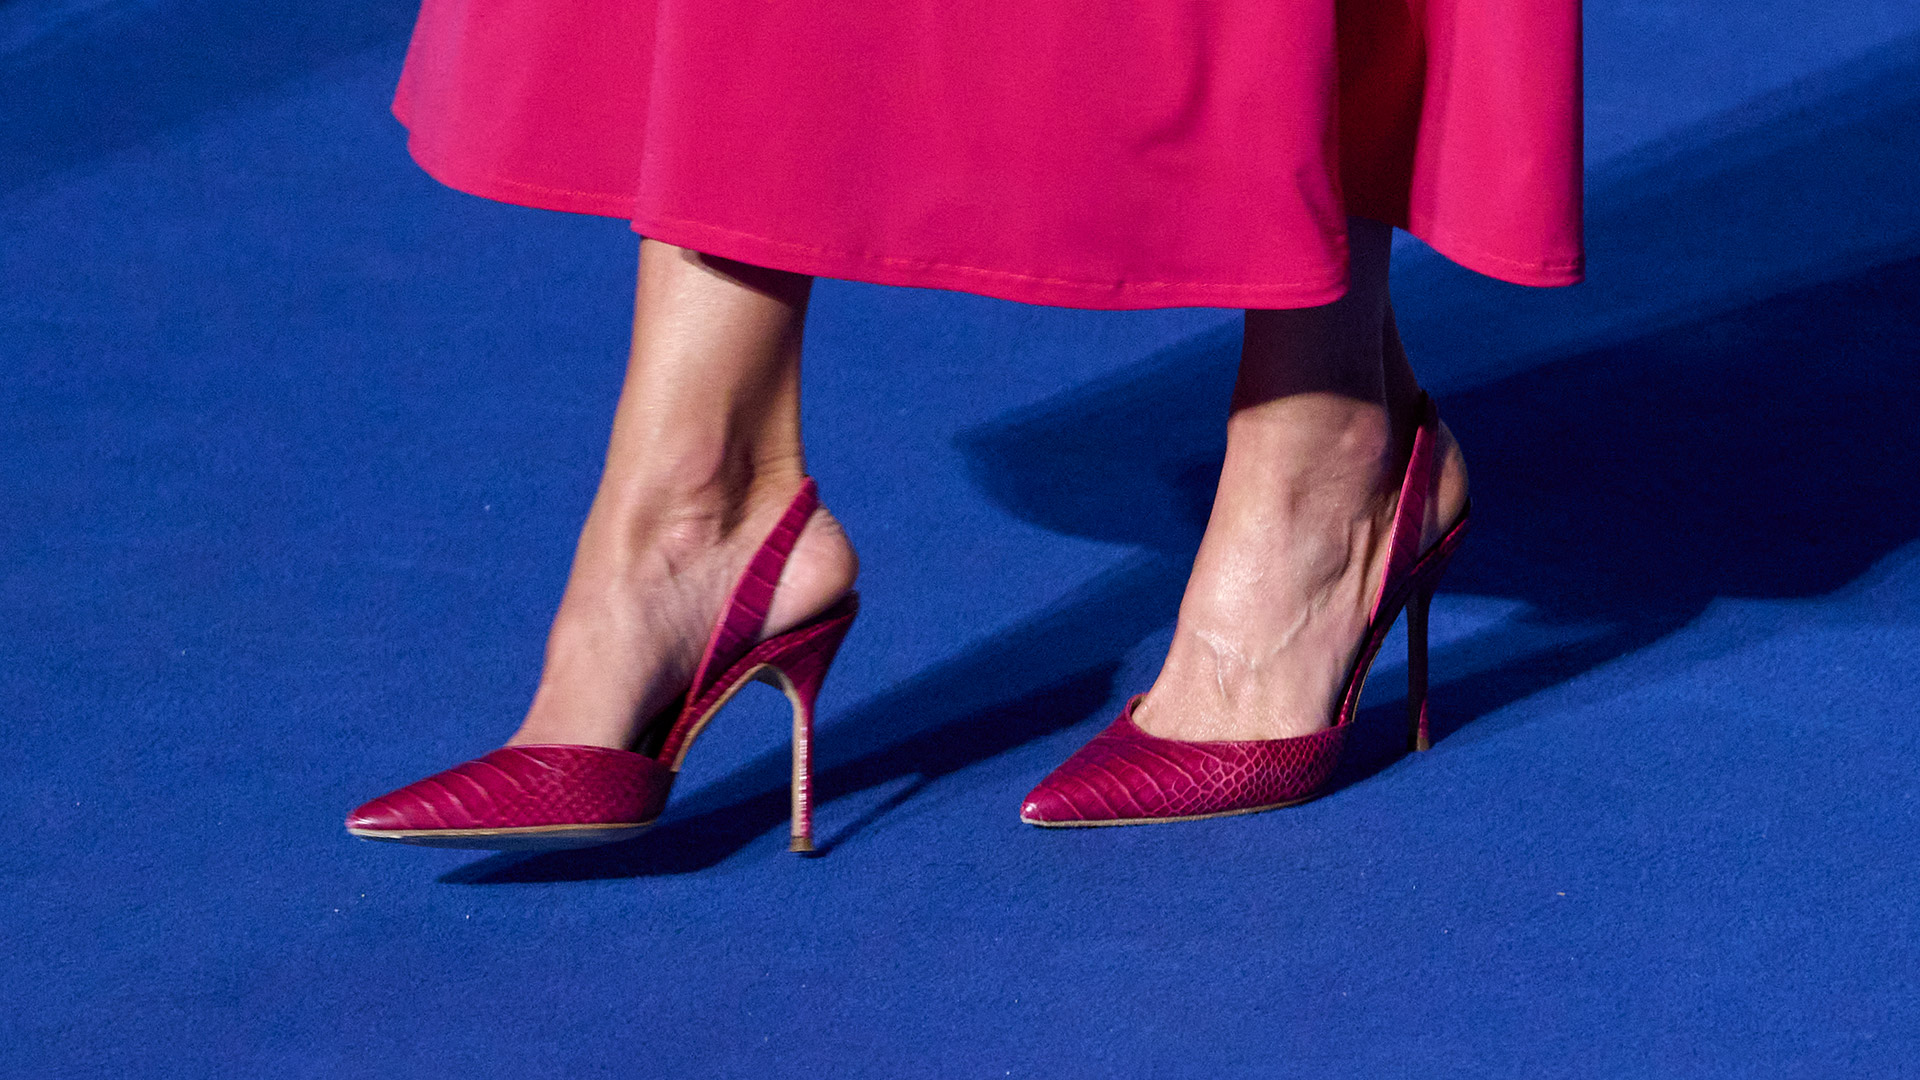 To complete her look, Letizia added a pair of stilettos made by Carolina Herrera (Photo by Carlos Alvarez H./Getty Images)